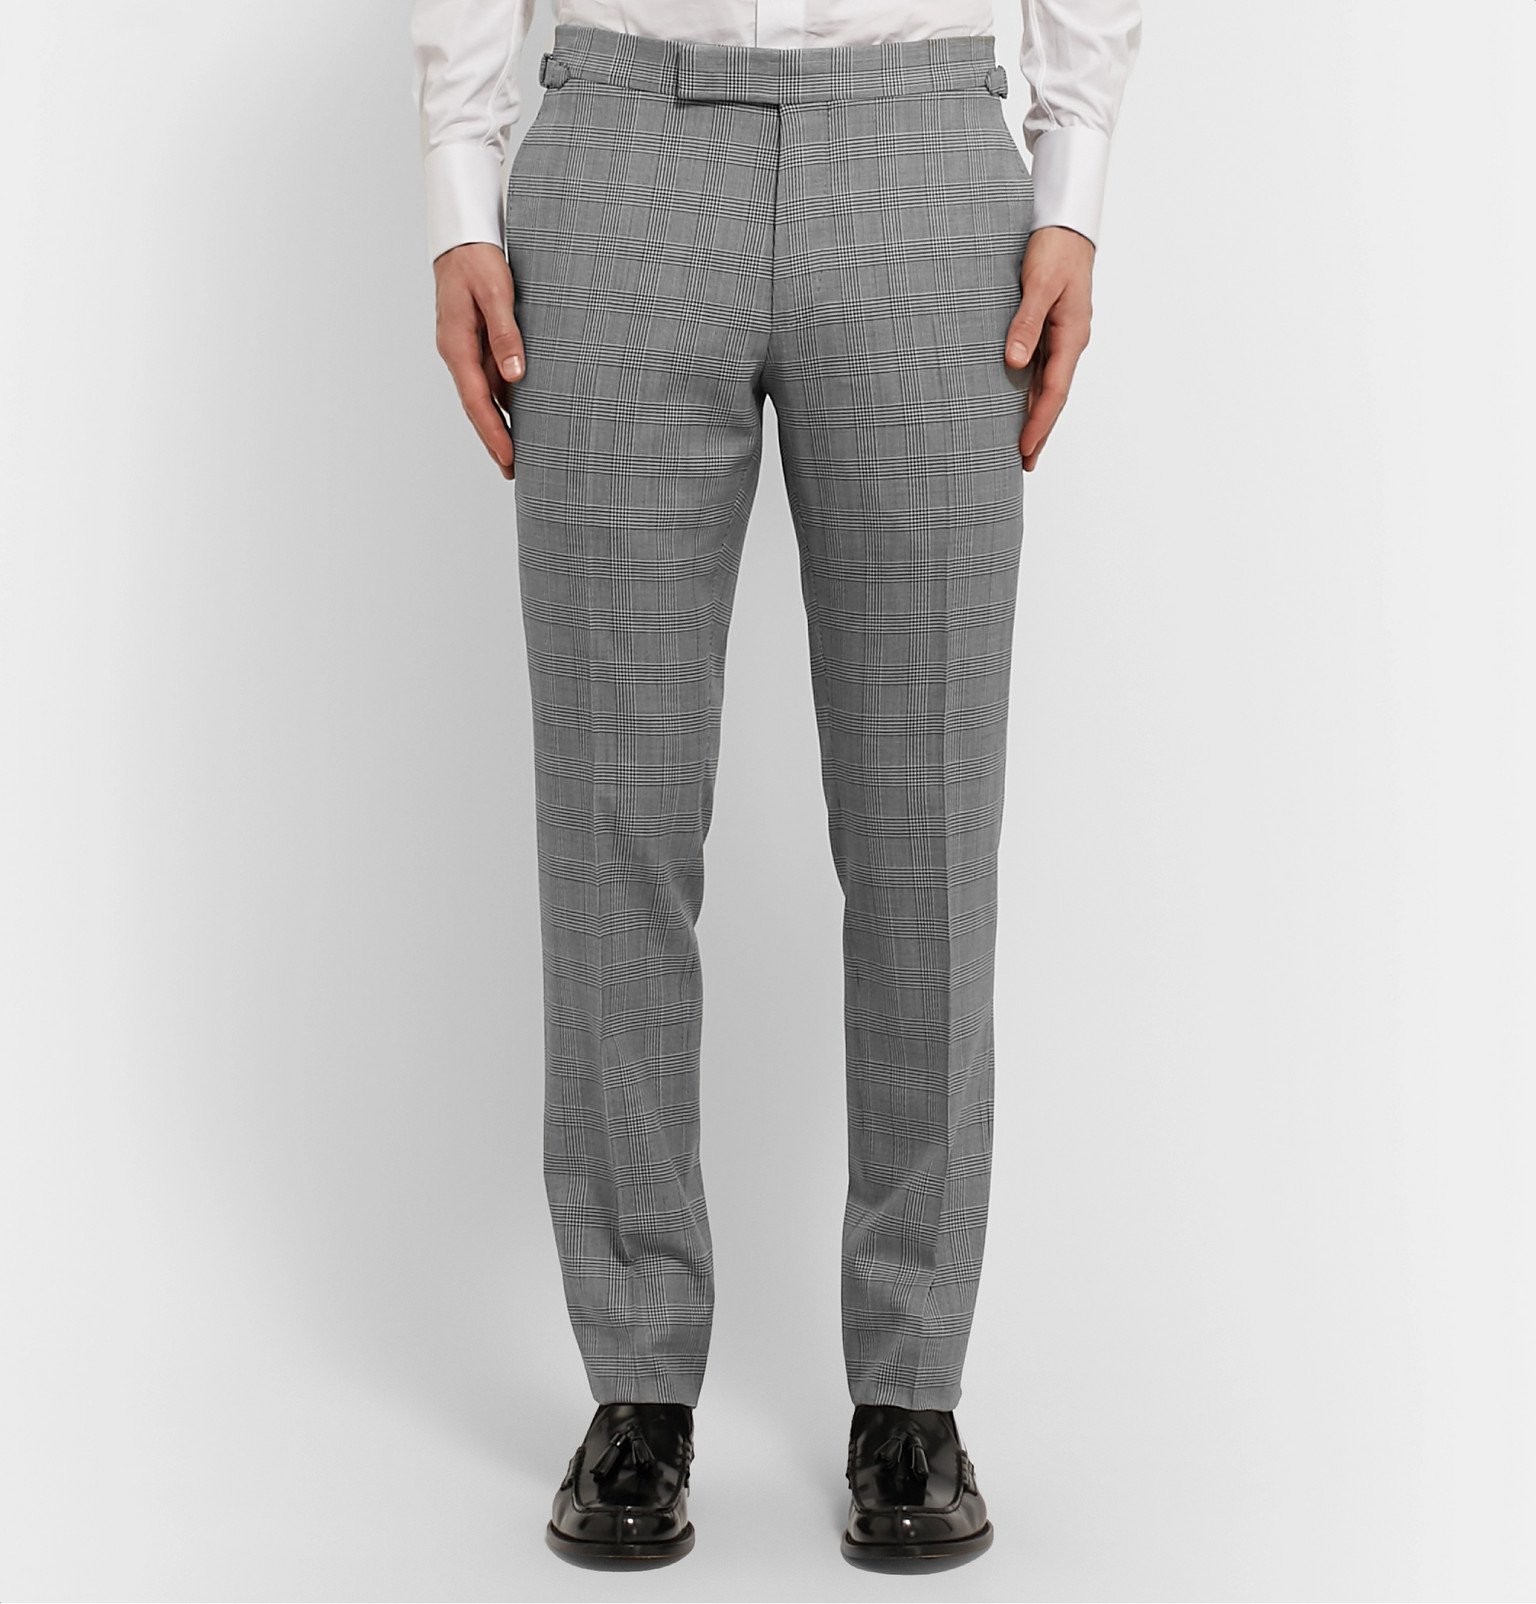 TOM FORD - Slim-Fit Prince of Wales Checked Wool Suit Trousers - Gray TOM  FORD